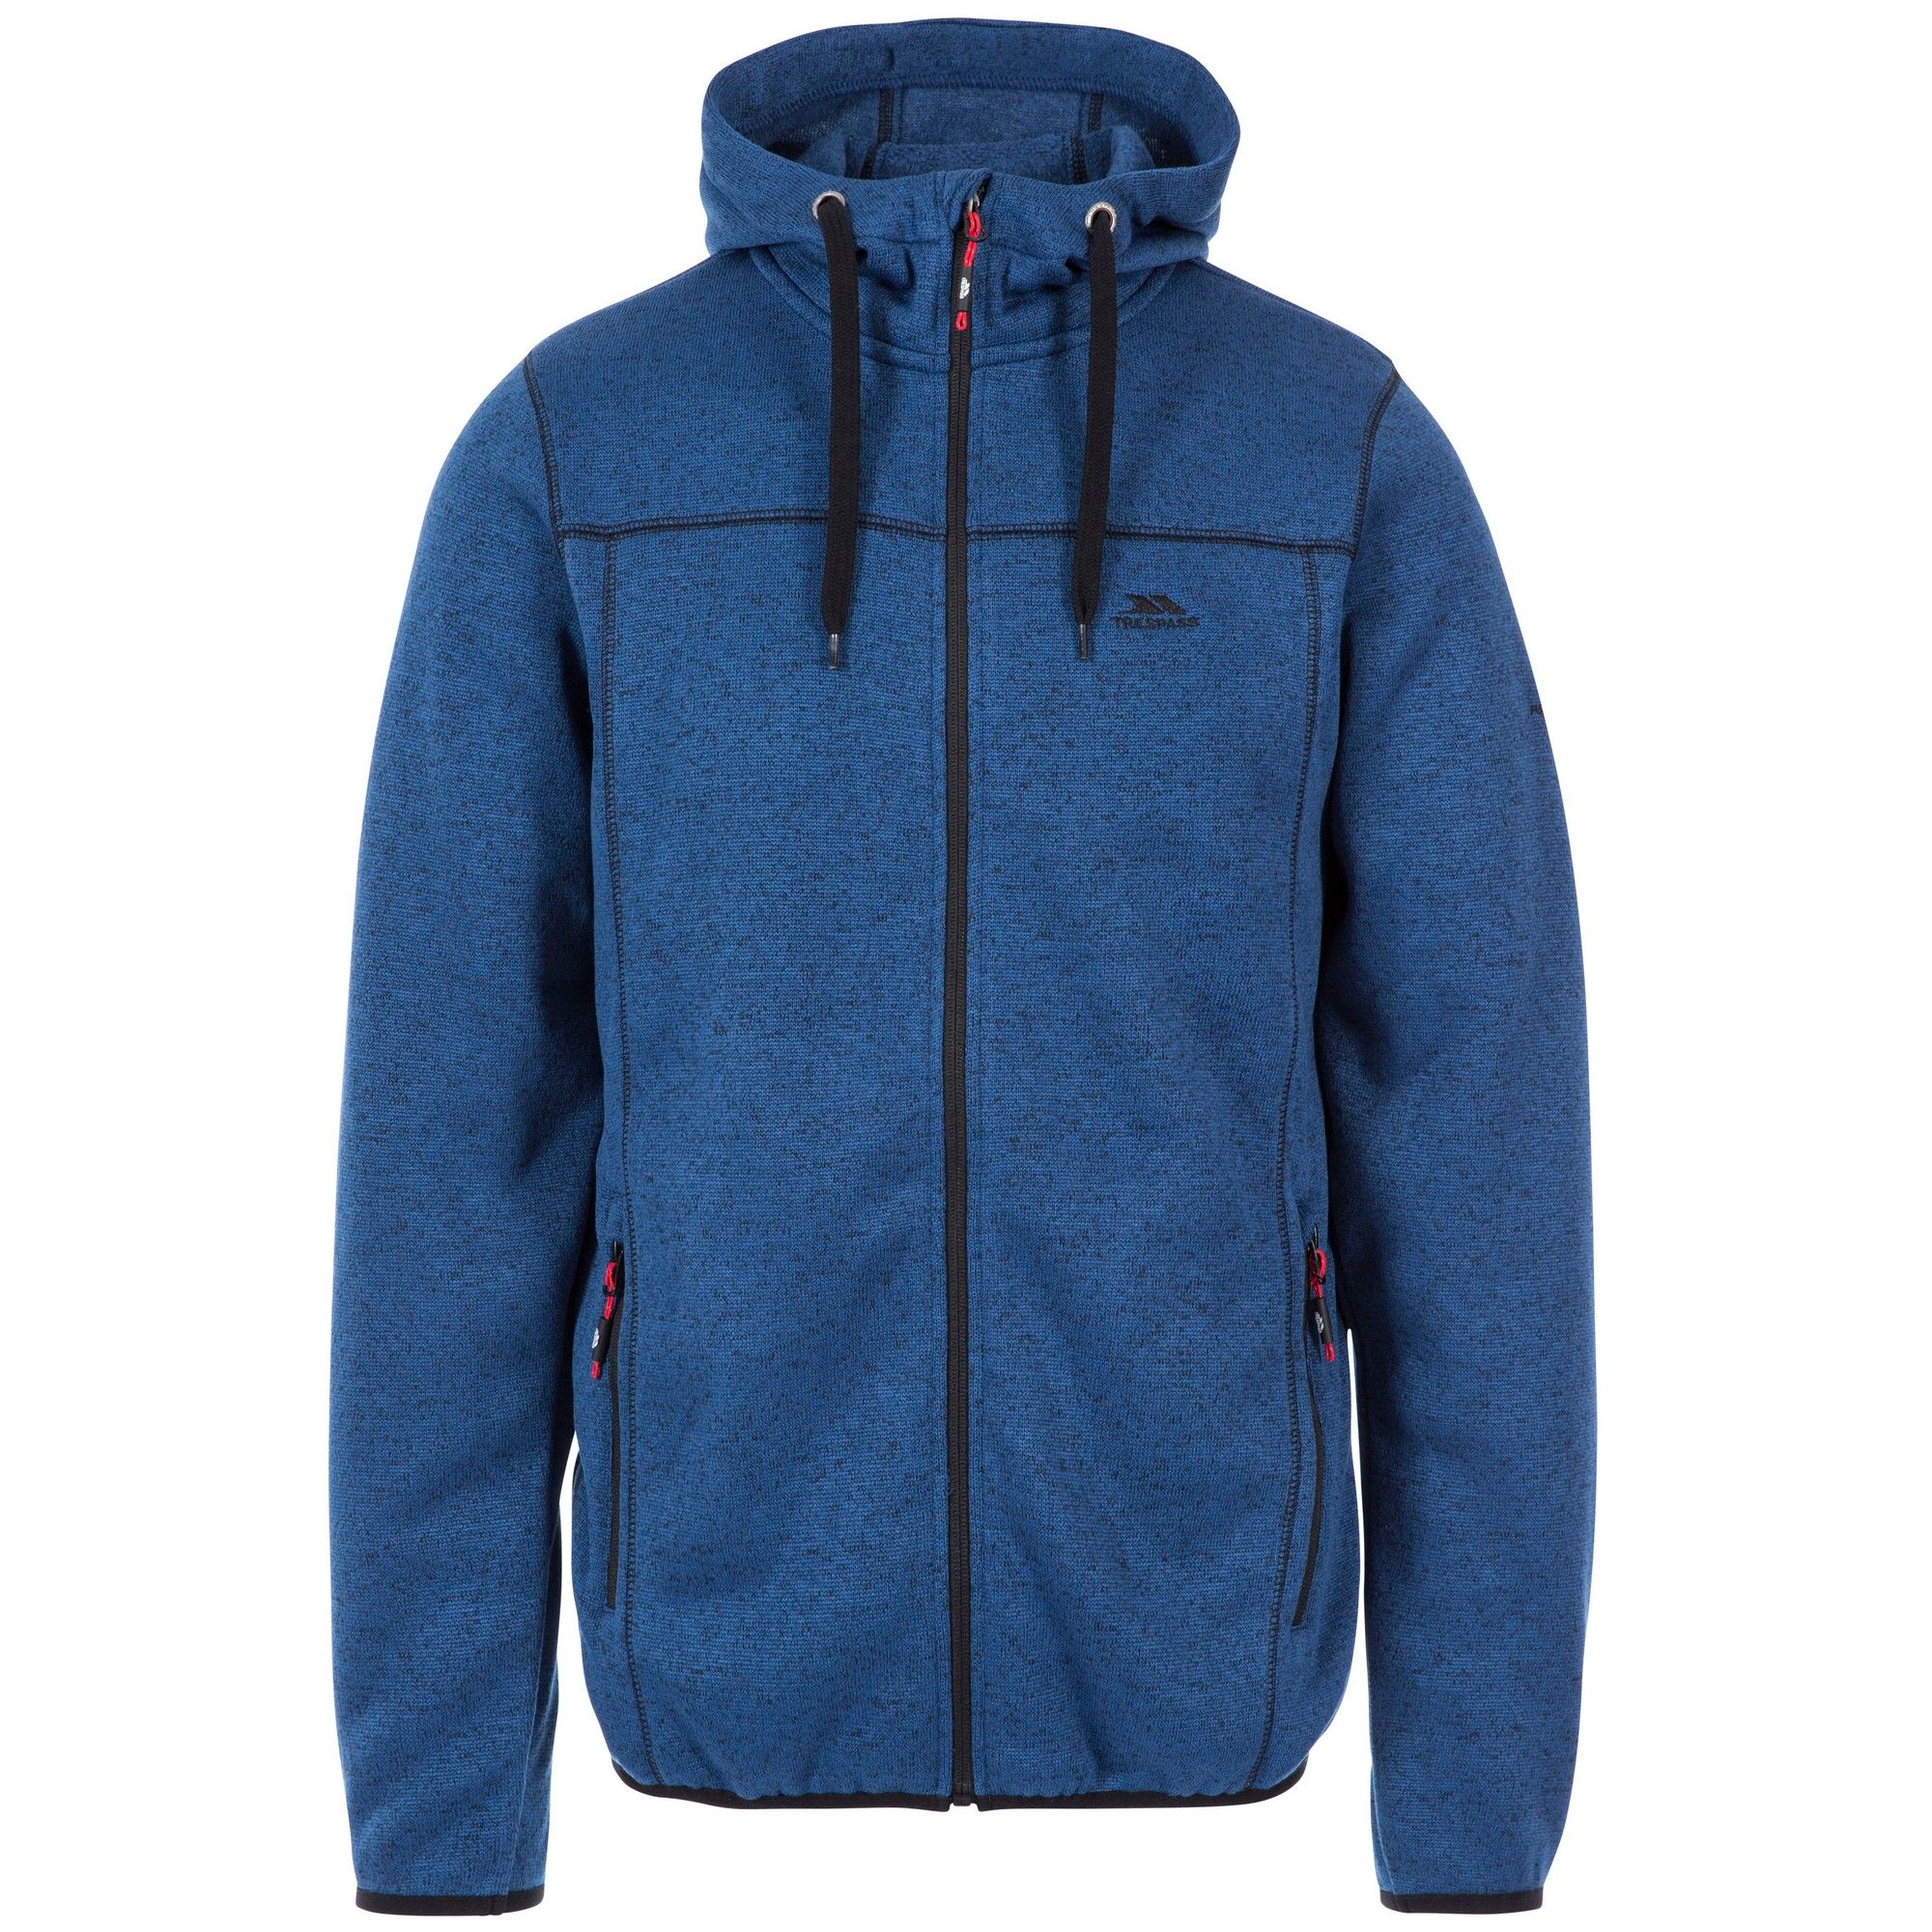 Knitted marl fleece. Brushed back. Hooded style. Contrast zips. 2 zip pockets. Inner zip facing. Coverseam stitch detail. Stretch bindings. Hood cord ties. Aitrap, 320gsm. 100% Polyester. Trespass Mens Chest Sizing (approx): S - 35-37in/89-94cm, M - 38-40in/96.5-101.5cm, L - 41-43in/104-109cm, XL - 44-46in/111.5-117cm, XXL - 46-48in/117-122cm, 3XL - 48-50in/122-127cm.